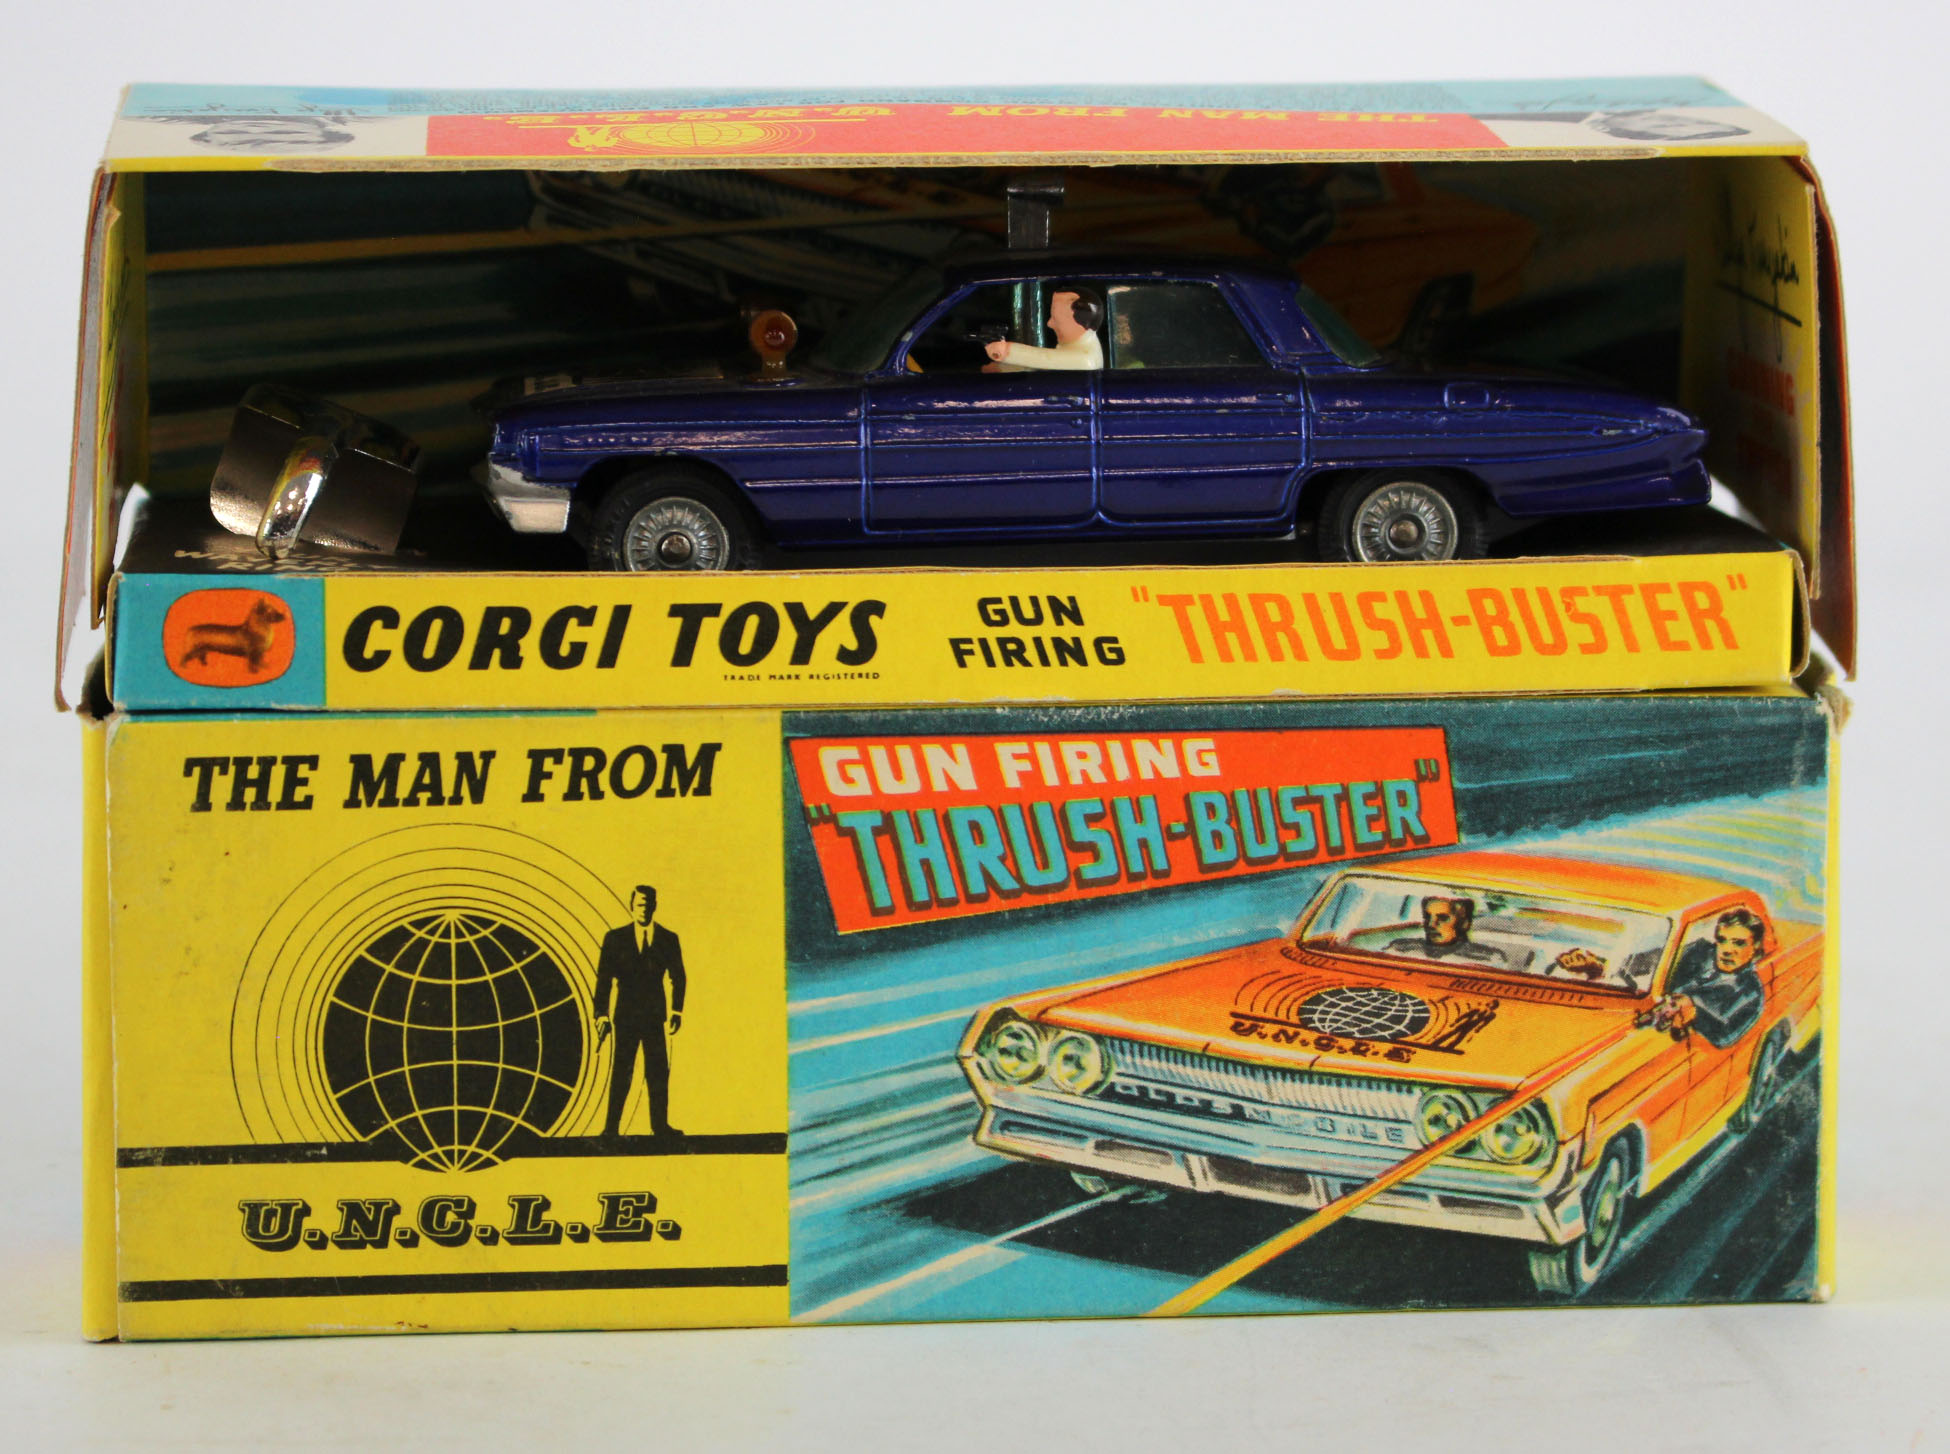 Corgi Toys, no. 497 'Gun Firing Thrush Buster (The Man From UNCLE)', card insert and Waverly Ring